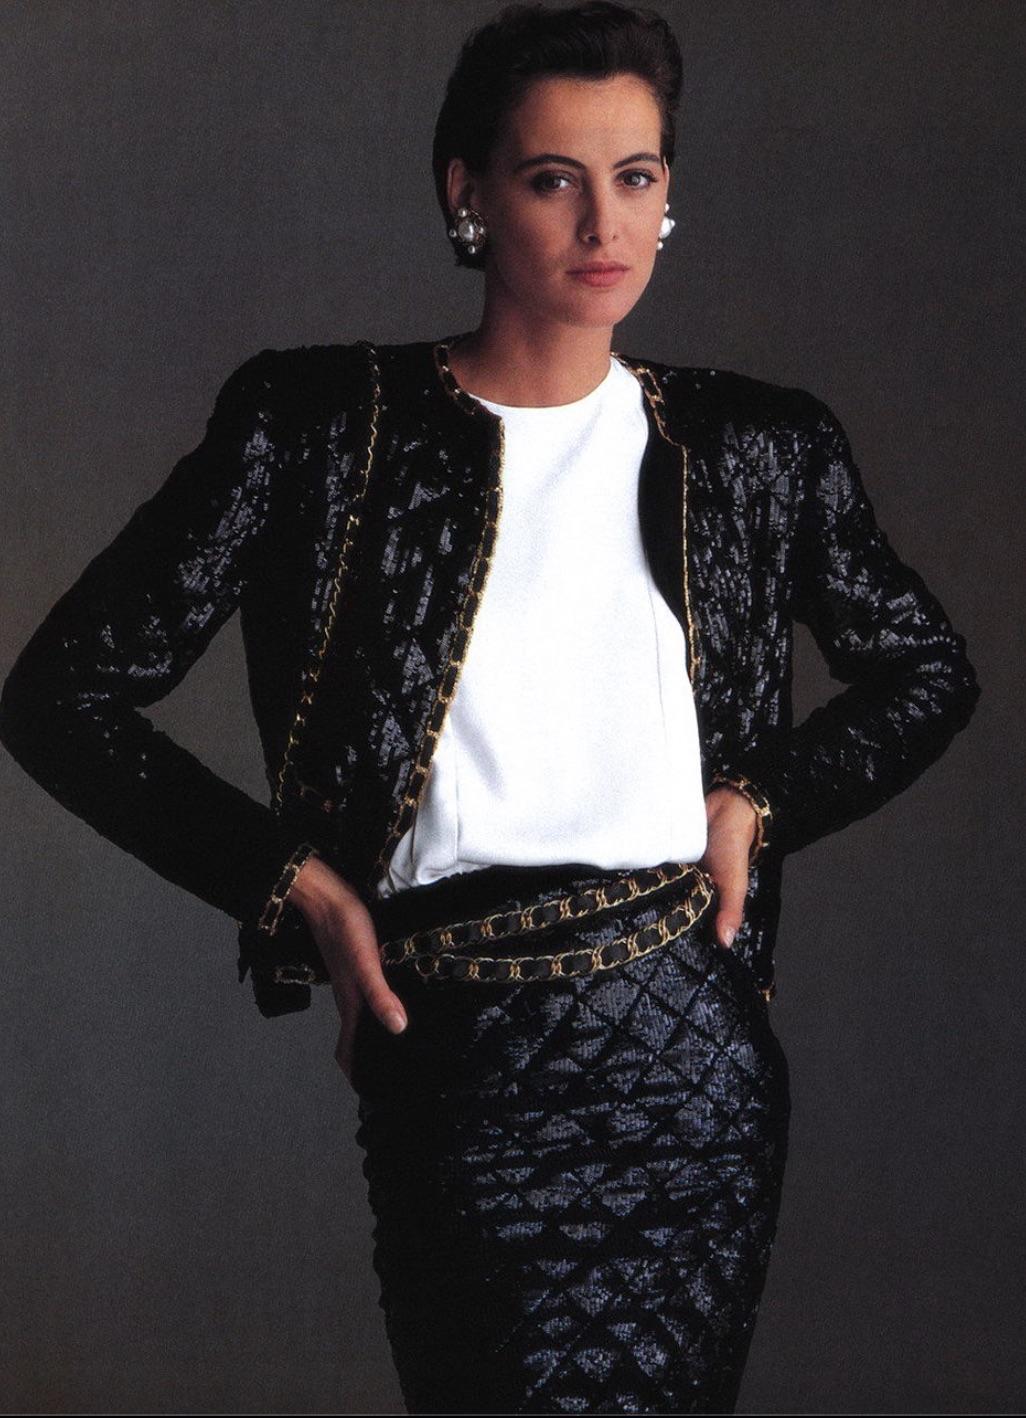 The iconic black sequin jacket from Chanel Spring/Summer 1987 collection is a true vintage gem. The open front boxy cut gives it a timeless elegance, while the shiny black sequins and signature quilted pattern make it unique and striking. The Haute